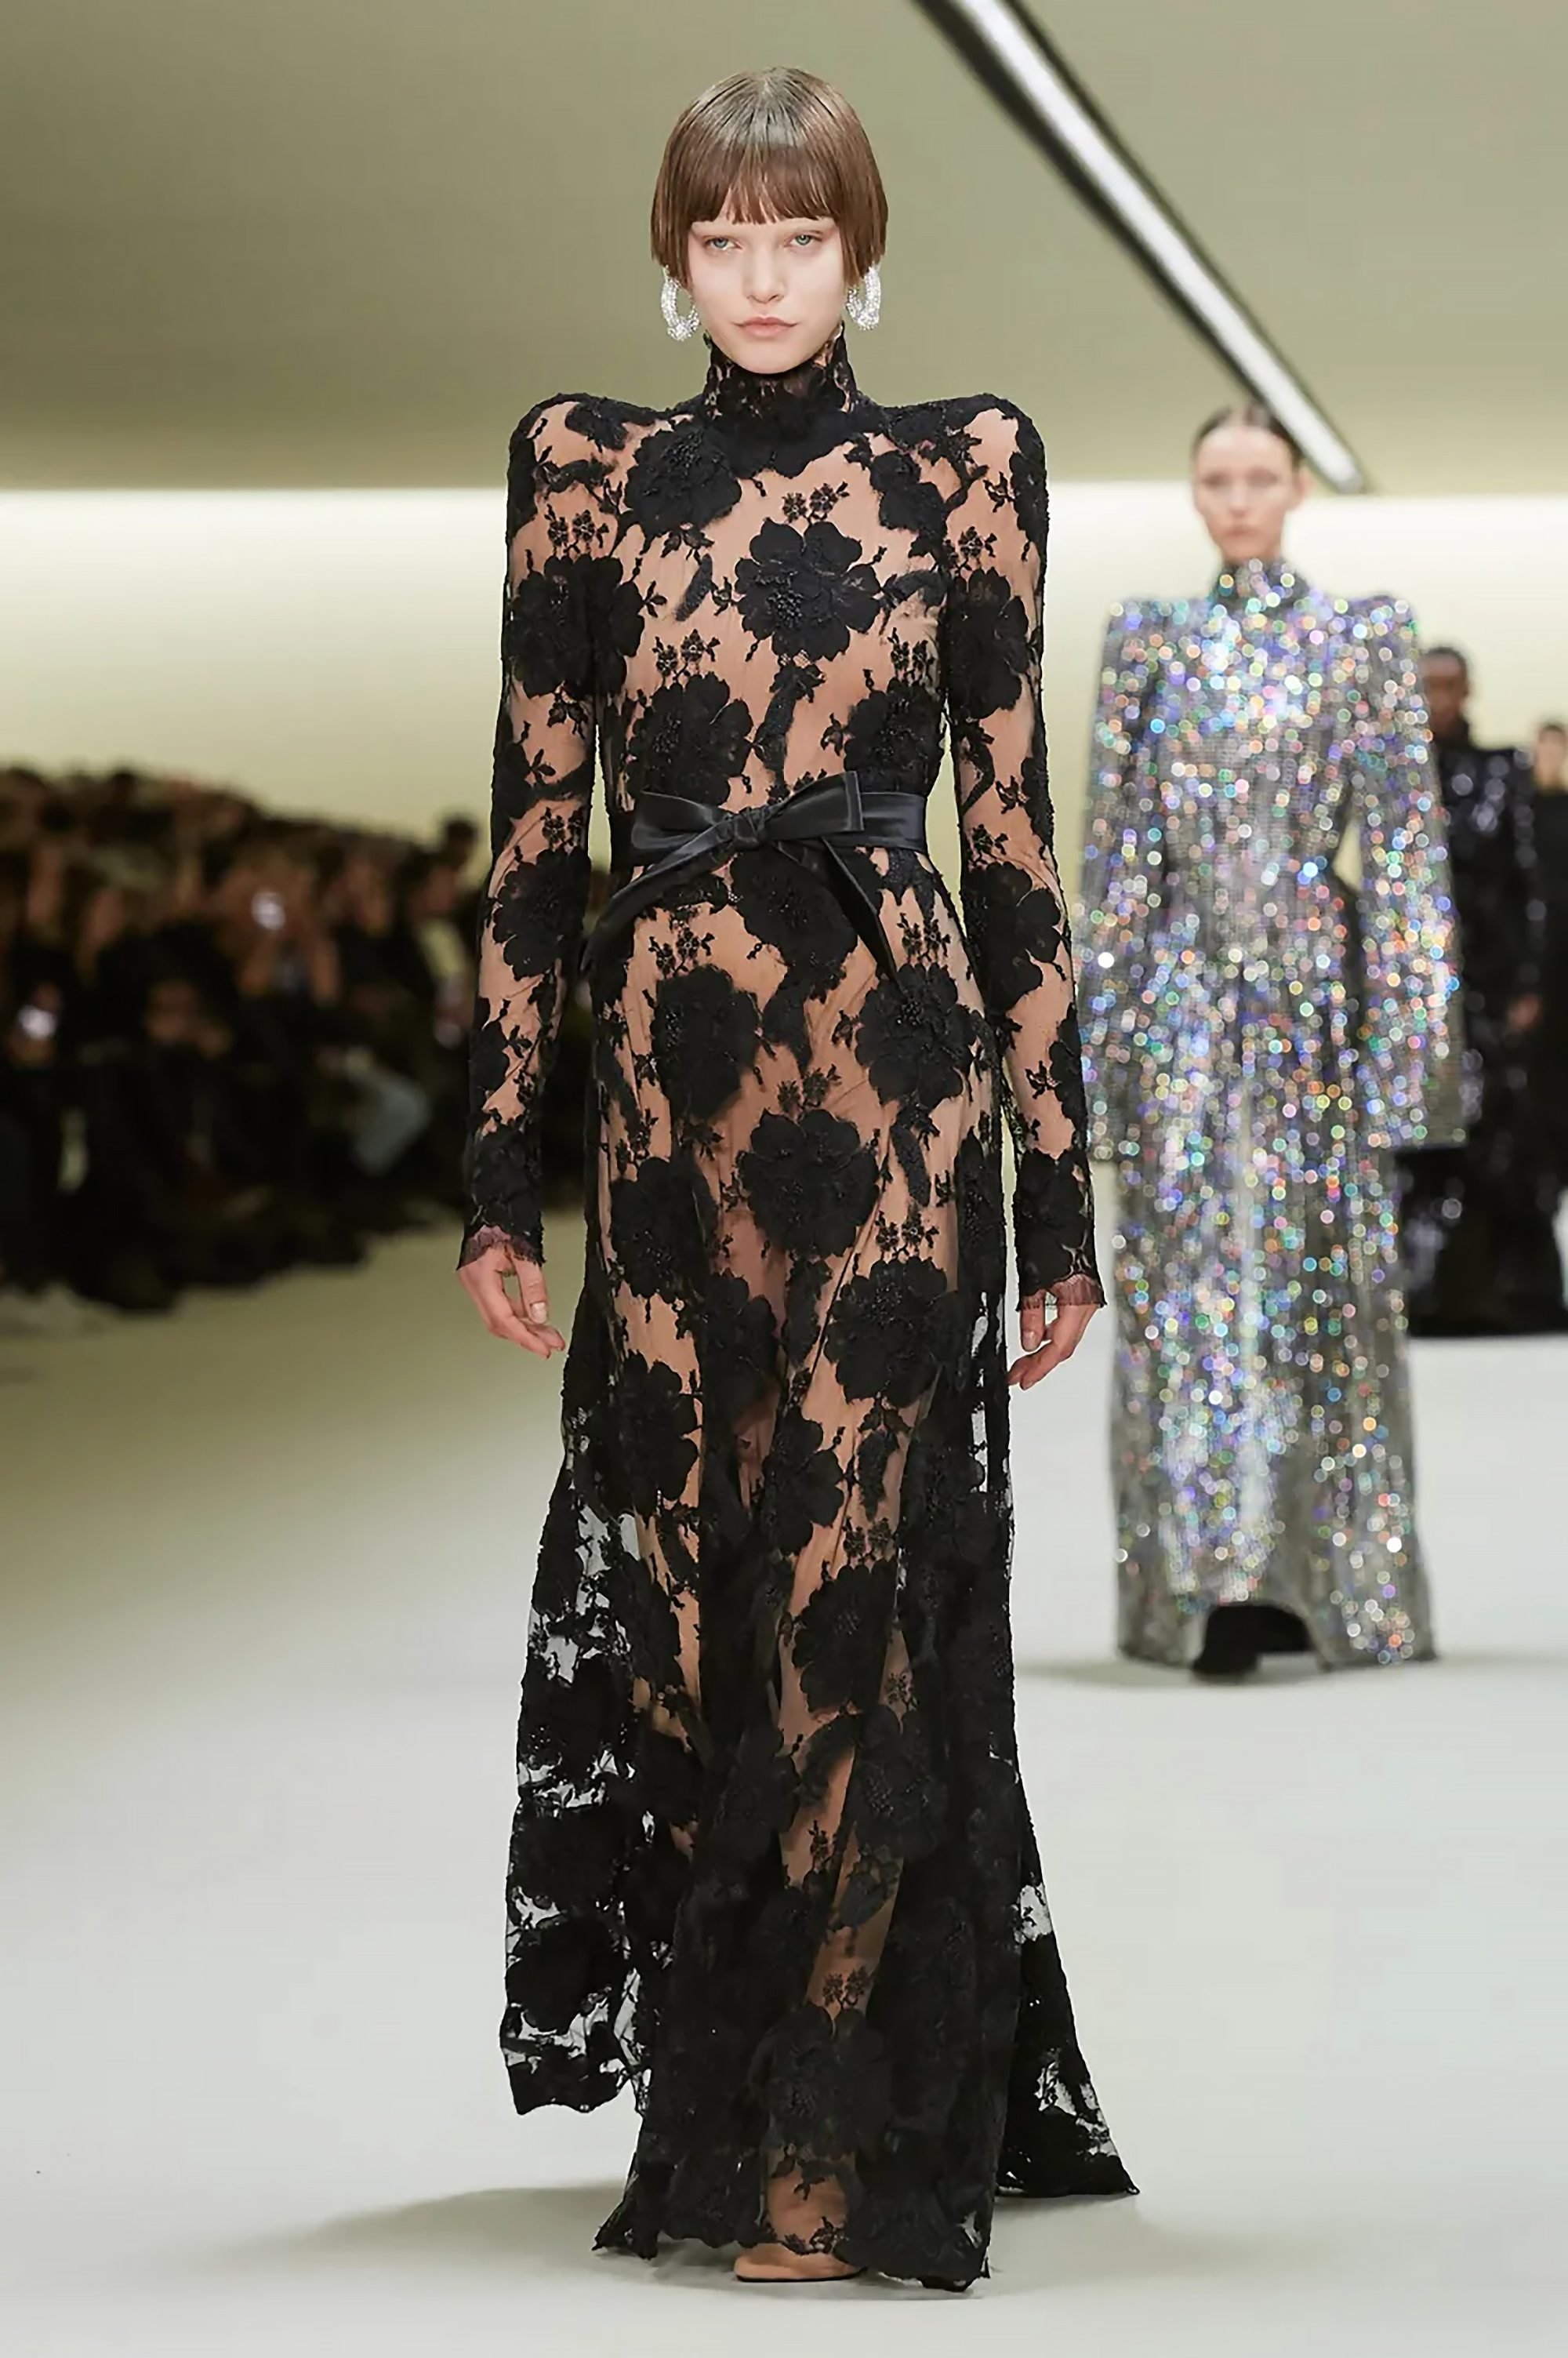 Paris Fashion Week 2023: best moments from the final shows – Dior and ...